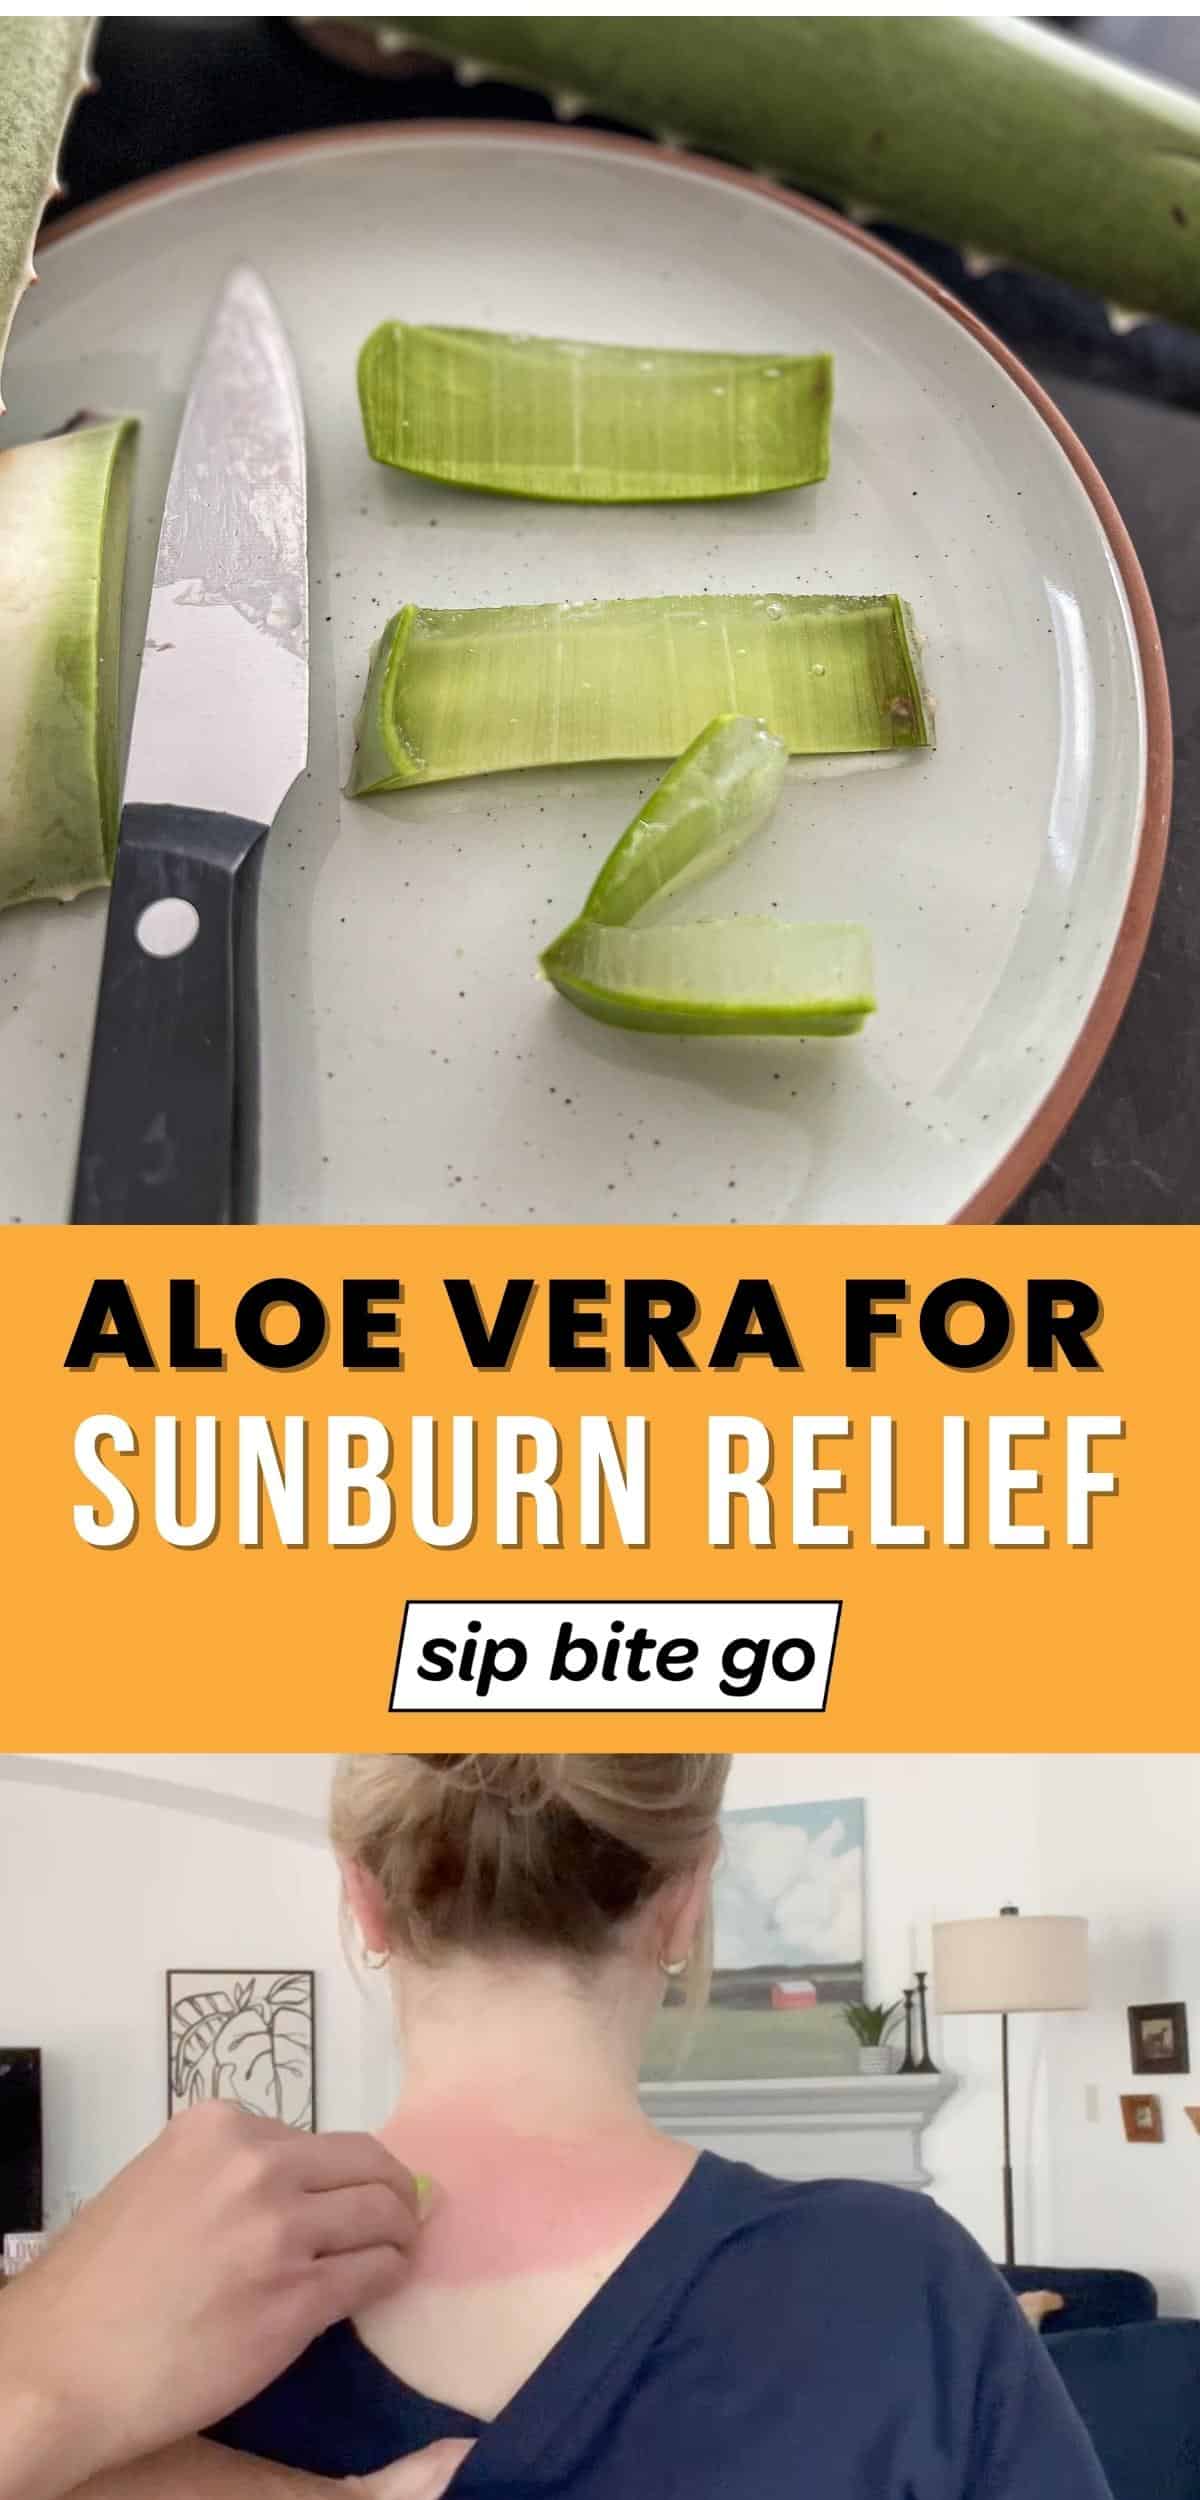 Demonstrating how to use aloe vera plant for sunscreen relief with text overlay and Sip Bite Go logo